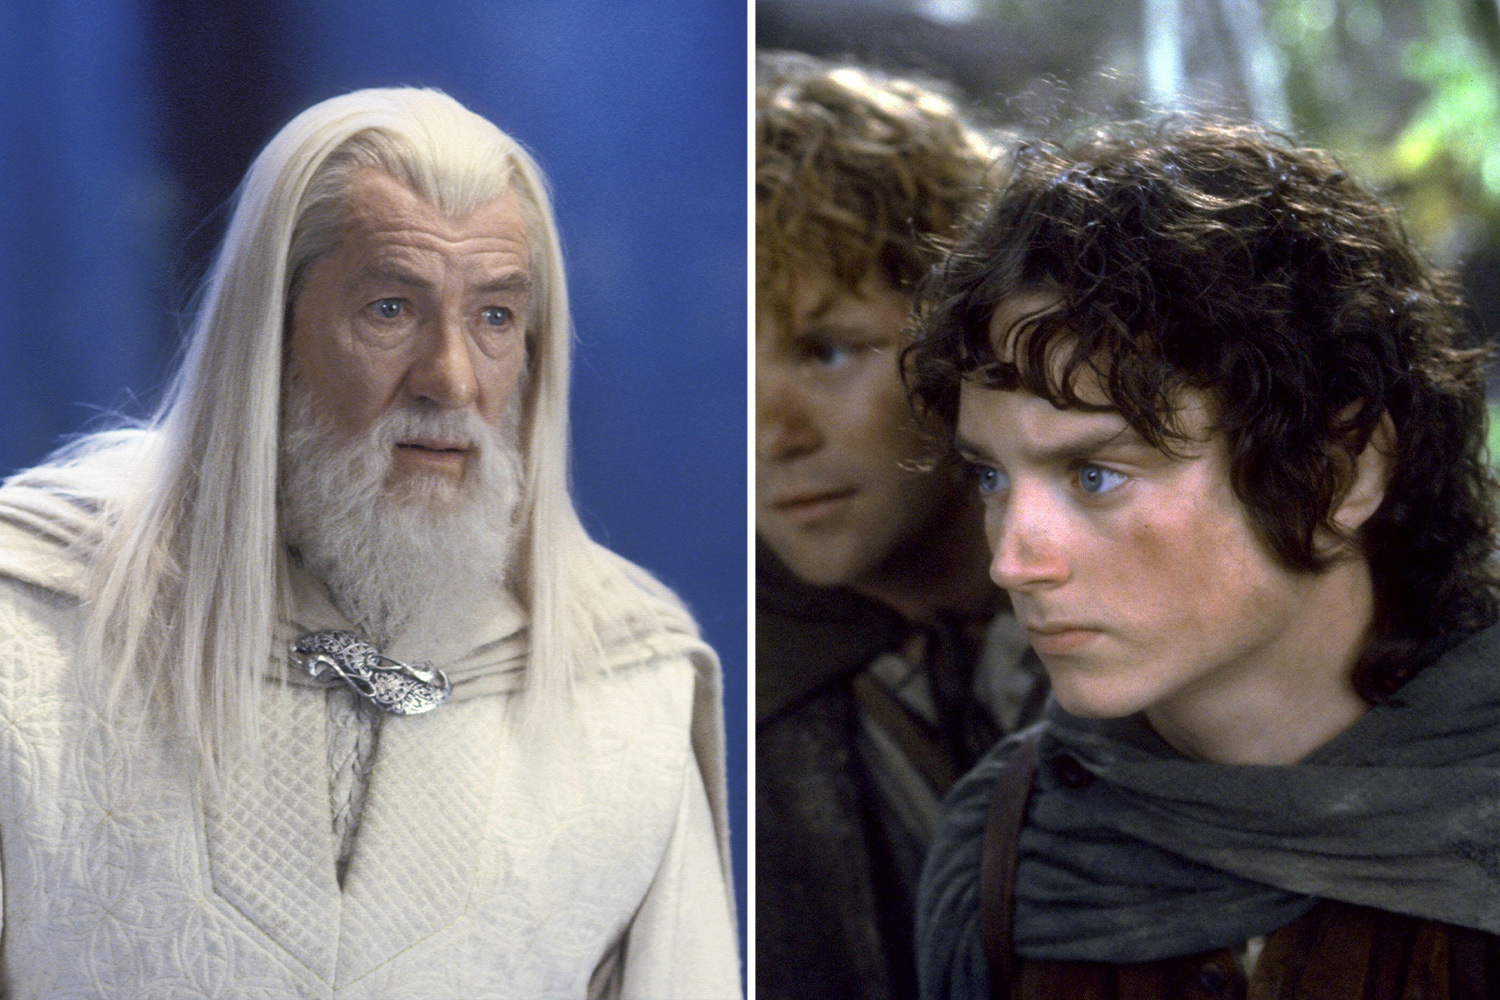 New The Lord of the Rings movie coming in 2026 as CEO gives hints about plot